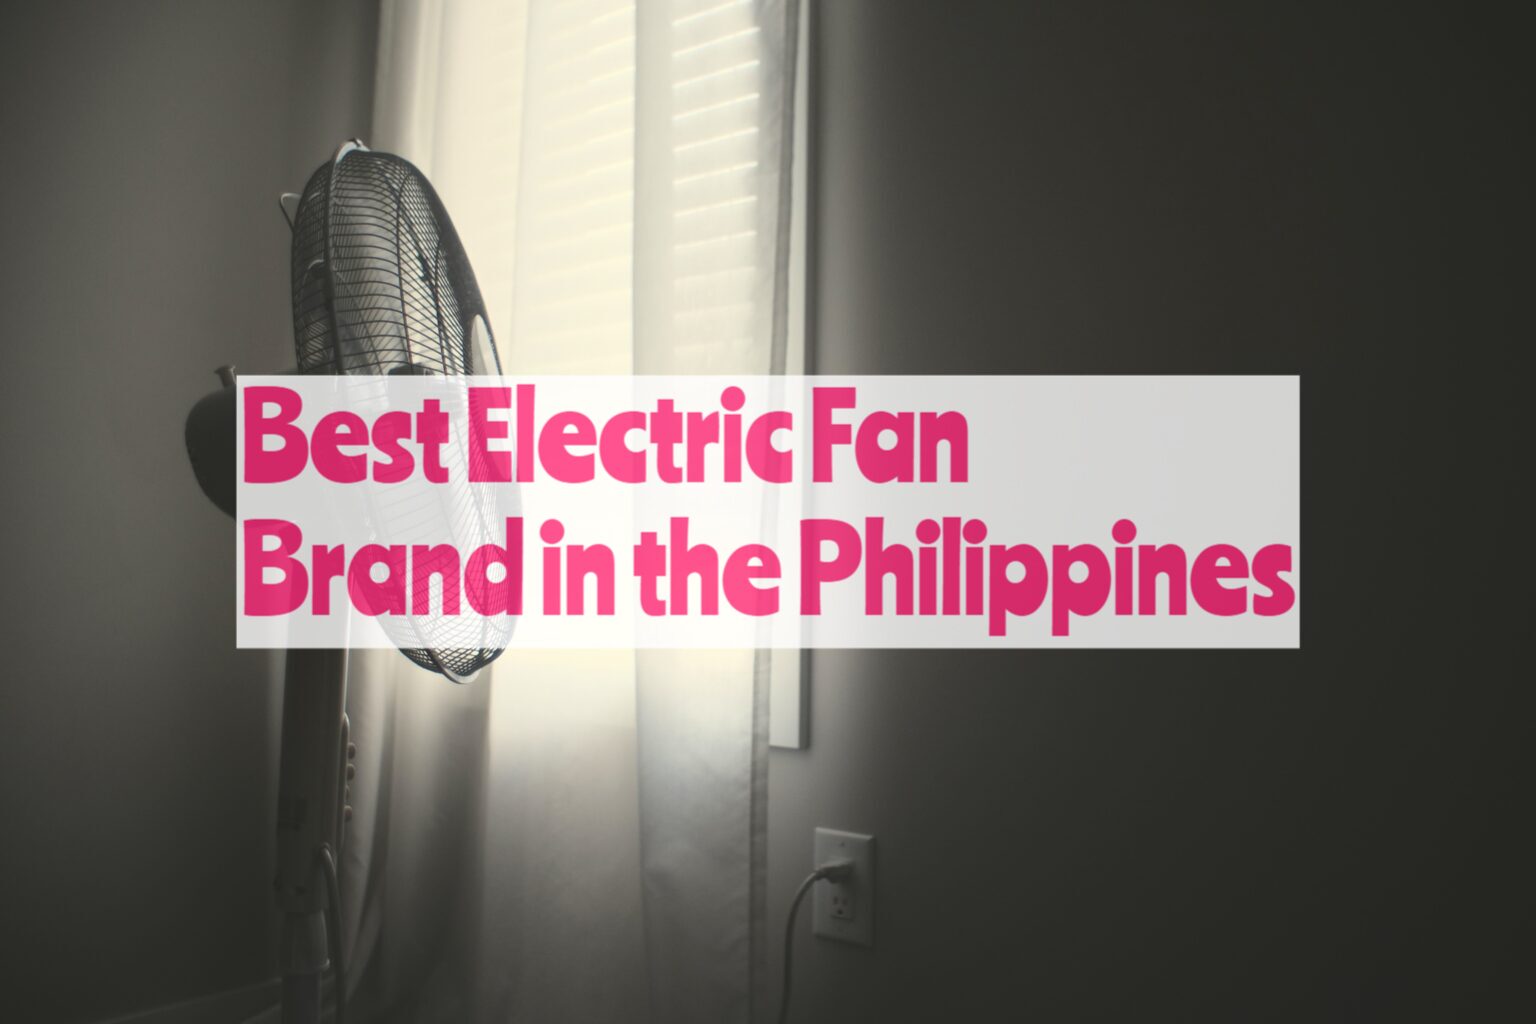 Best Electric Fan Brand in the Philippines